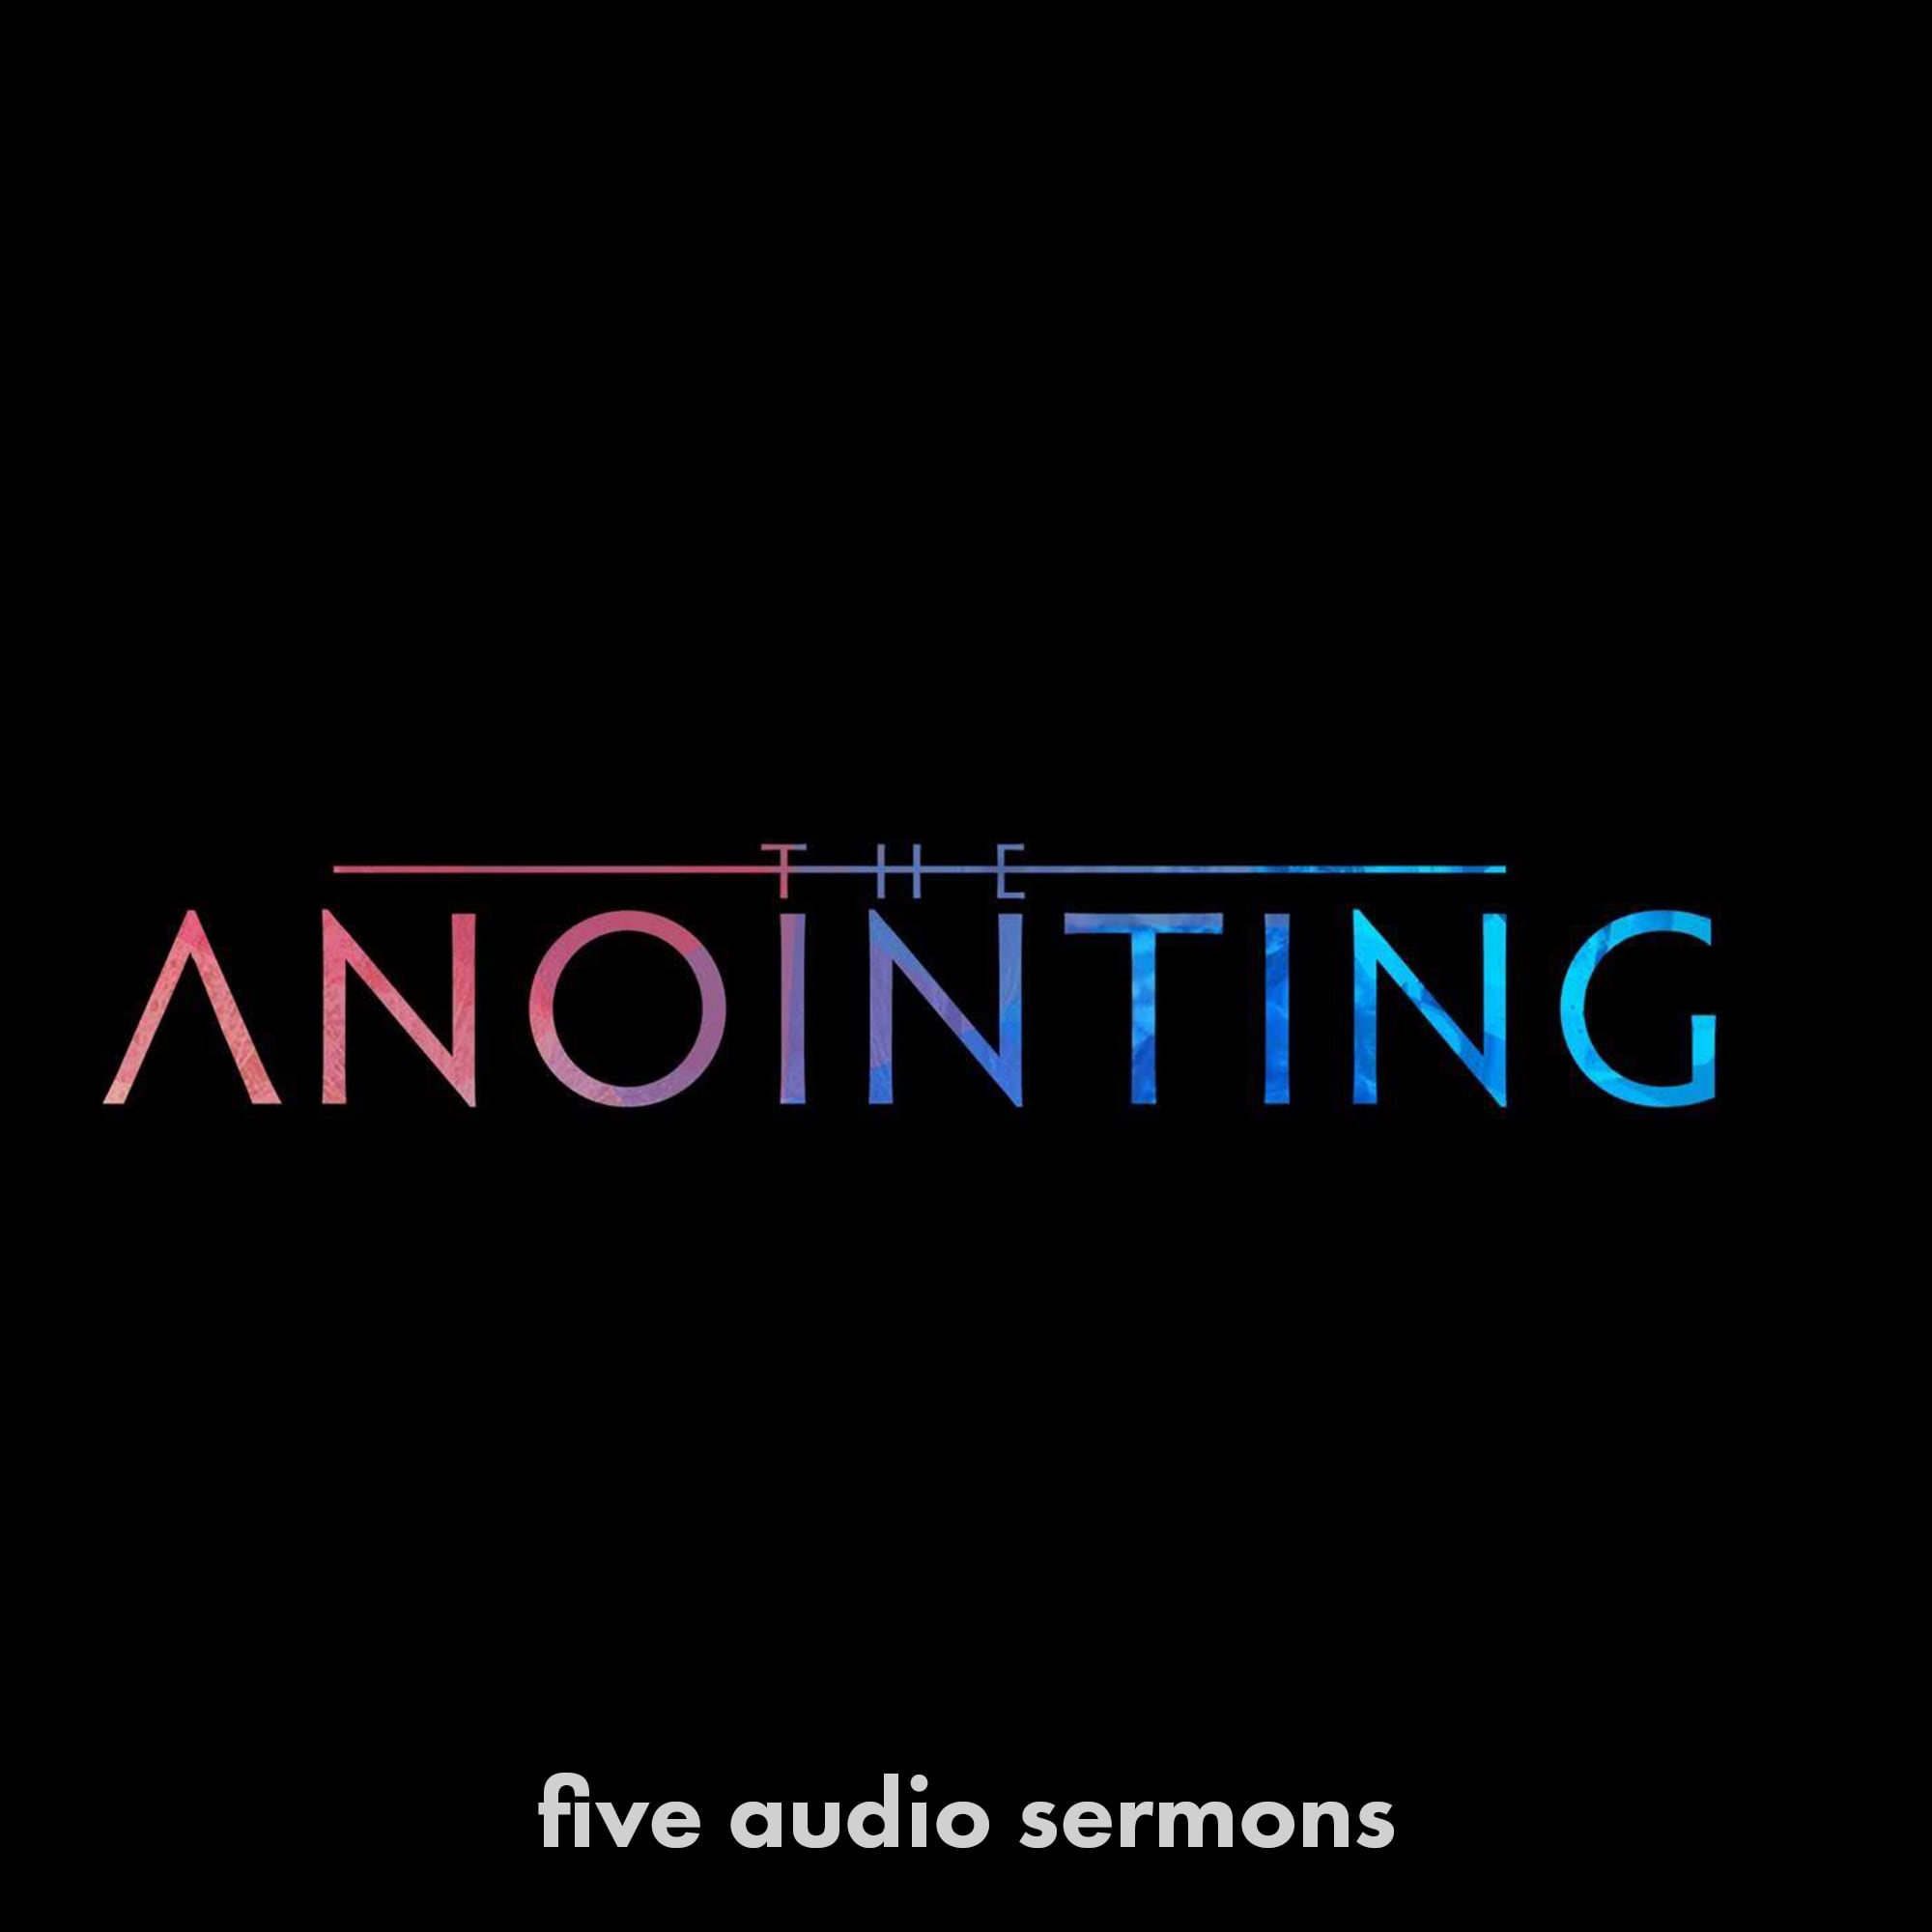 Featured Image for “Anointing”